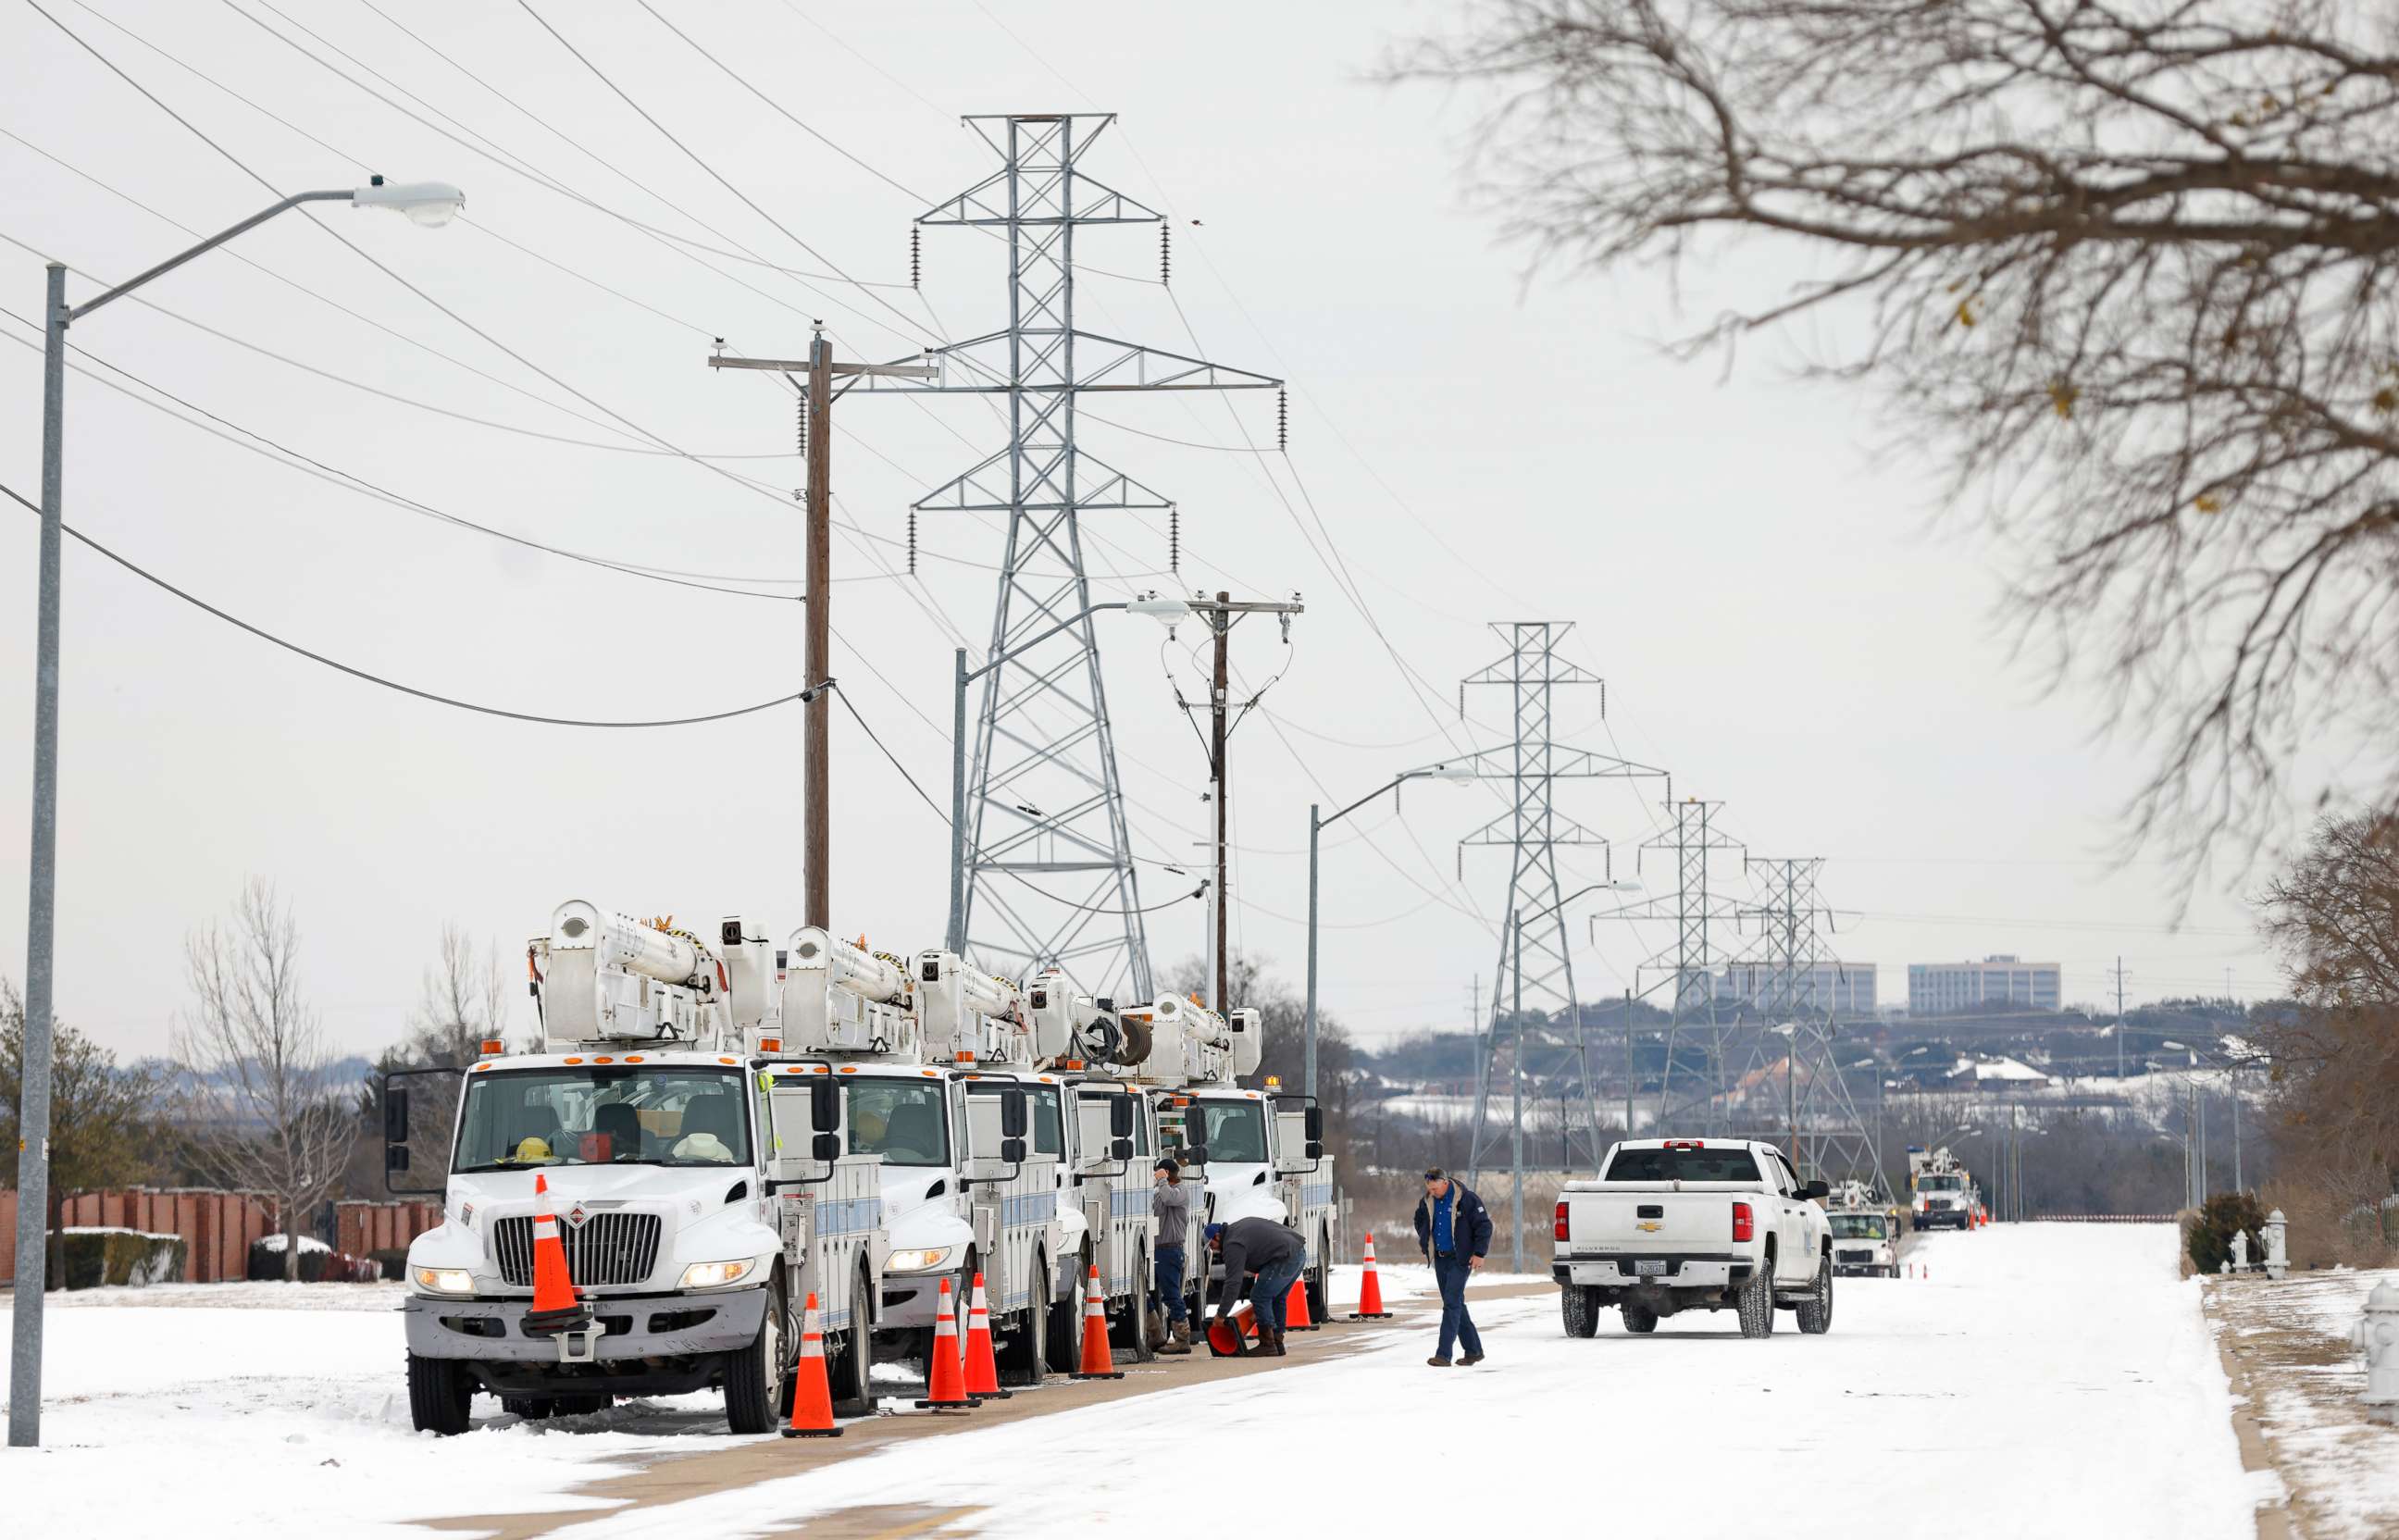 PHOTO: Pike Electric service trucks line up after a snow storm on Feb. 16, 2021, in Fort Worth, Texas.